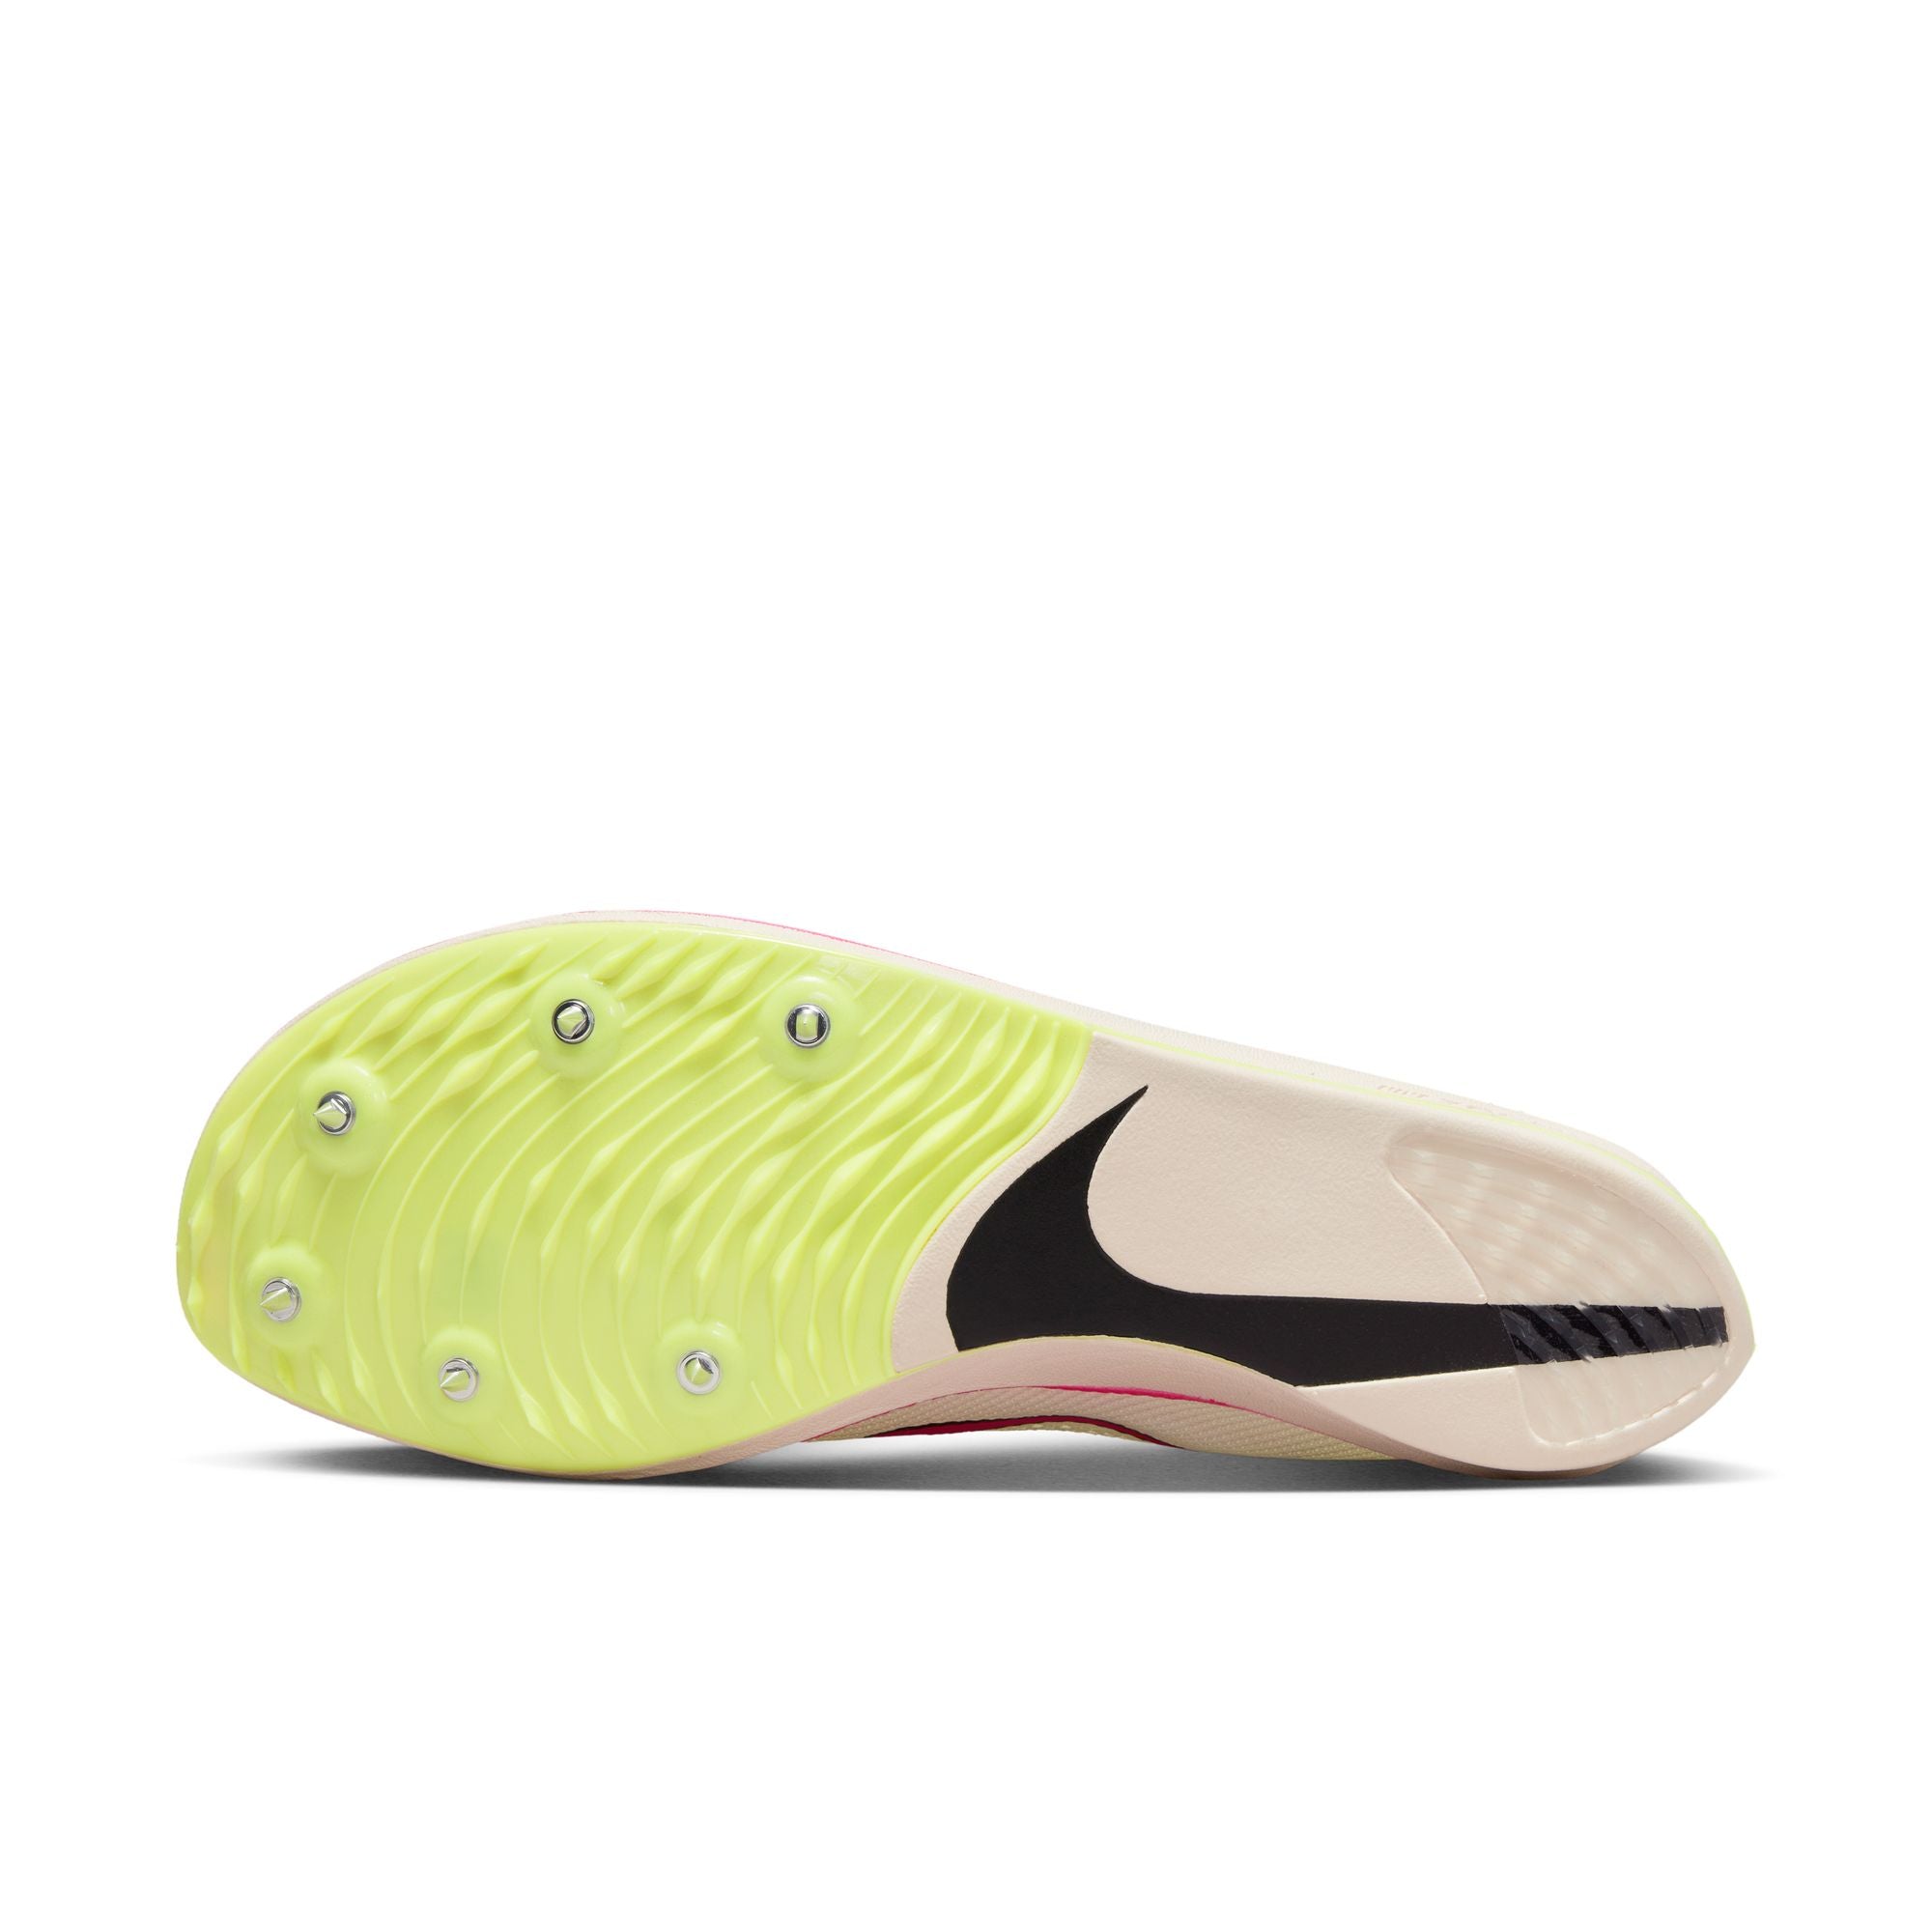 NIKE ZOOMX DRAGONFLY - 101 SAIL/FIERCE PINK 